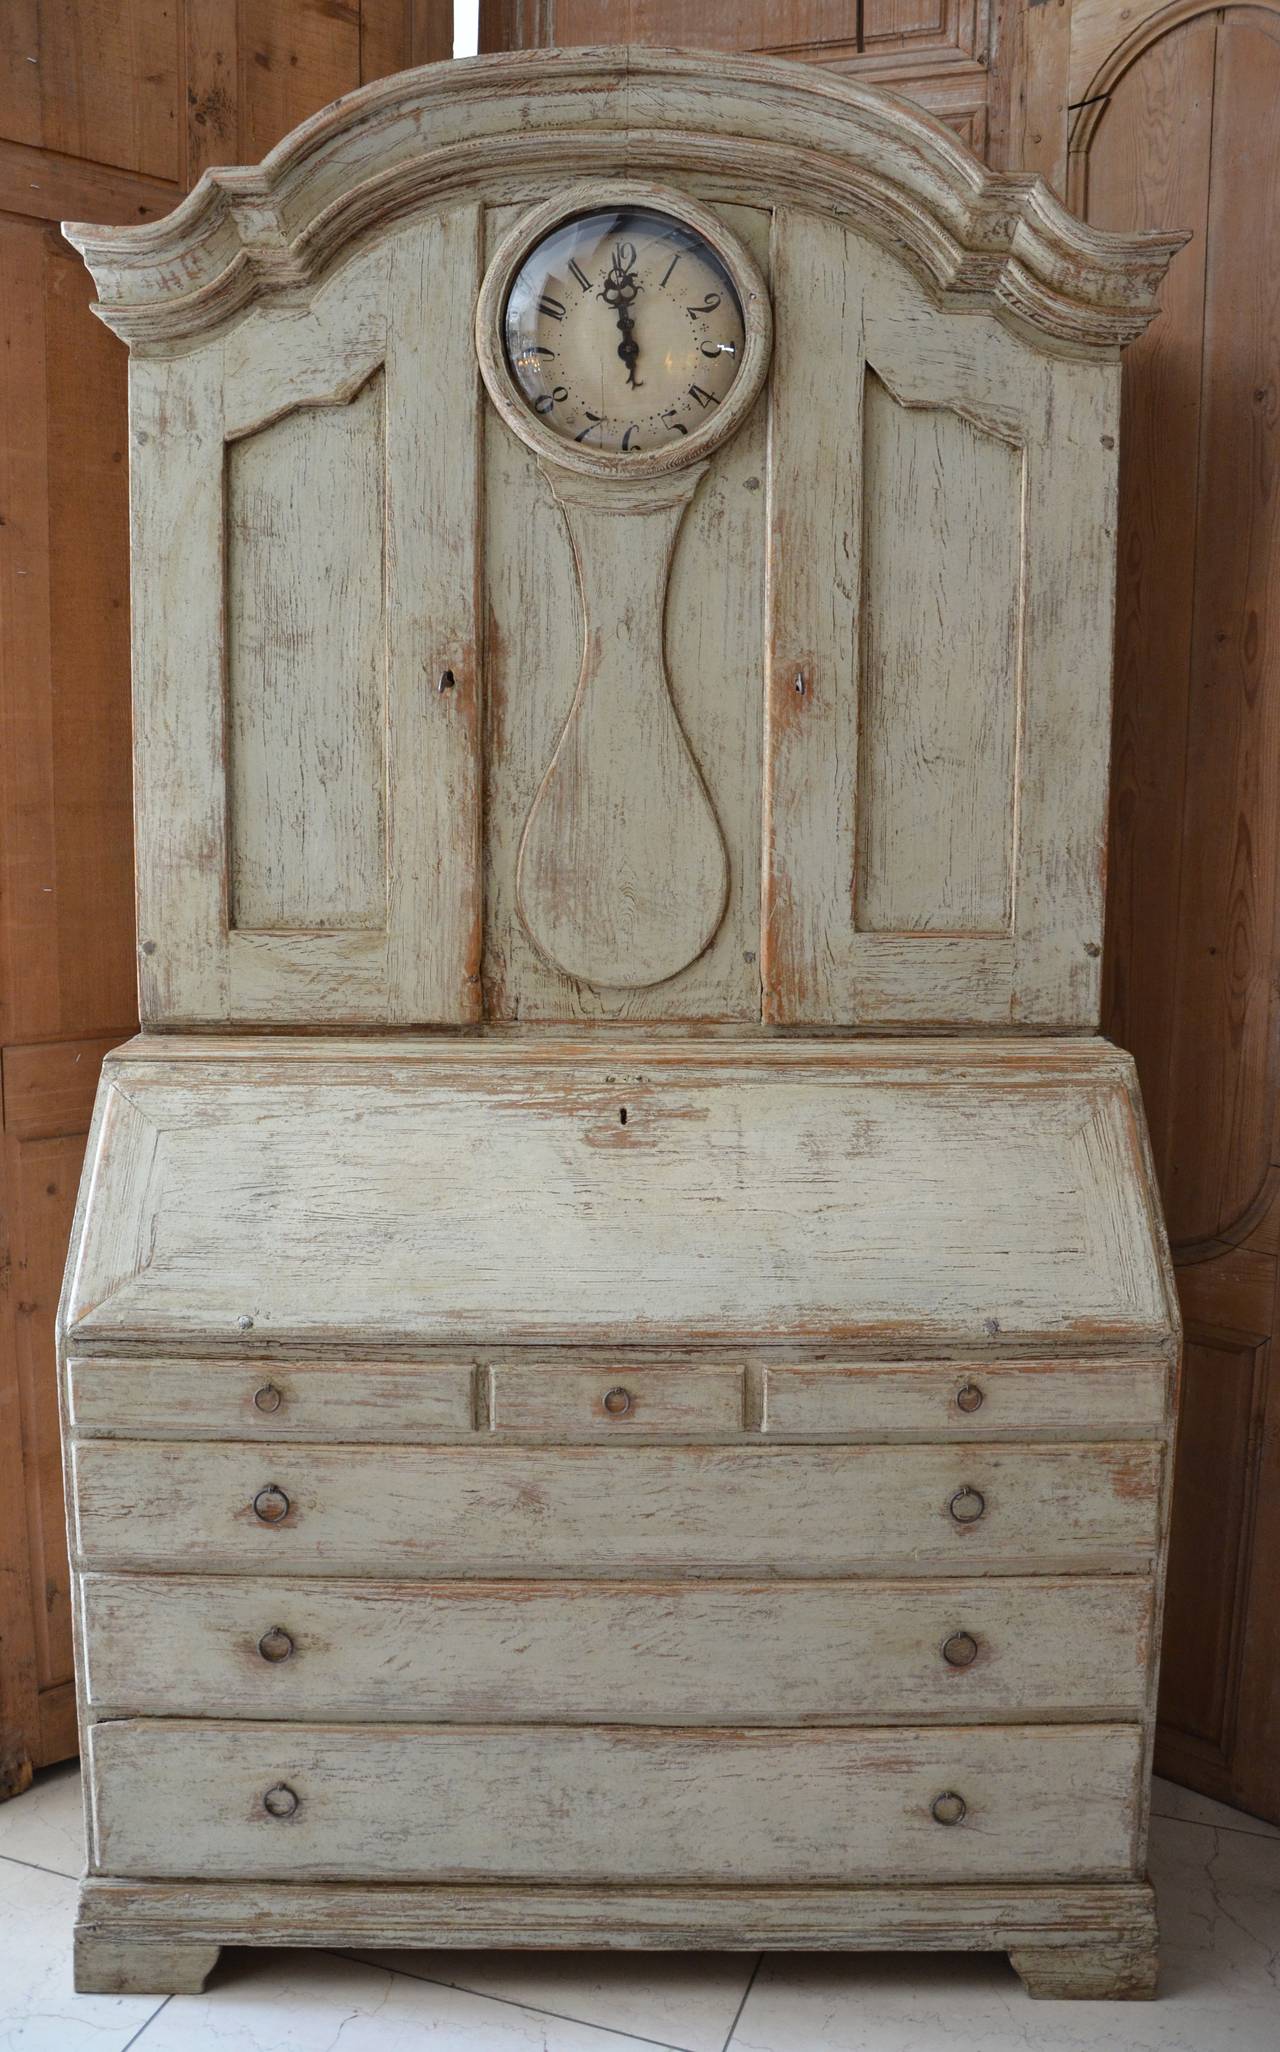 18th century Swedish period Rococo clock secretaire cabinet with wonderful arched cornice, raised panel doors on each side of the clock casing, original hardware, original and rare one hand dial, the earliest one.
Writing surface with several banks